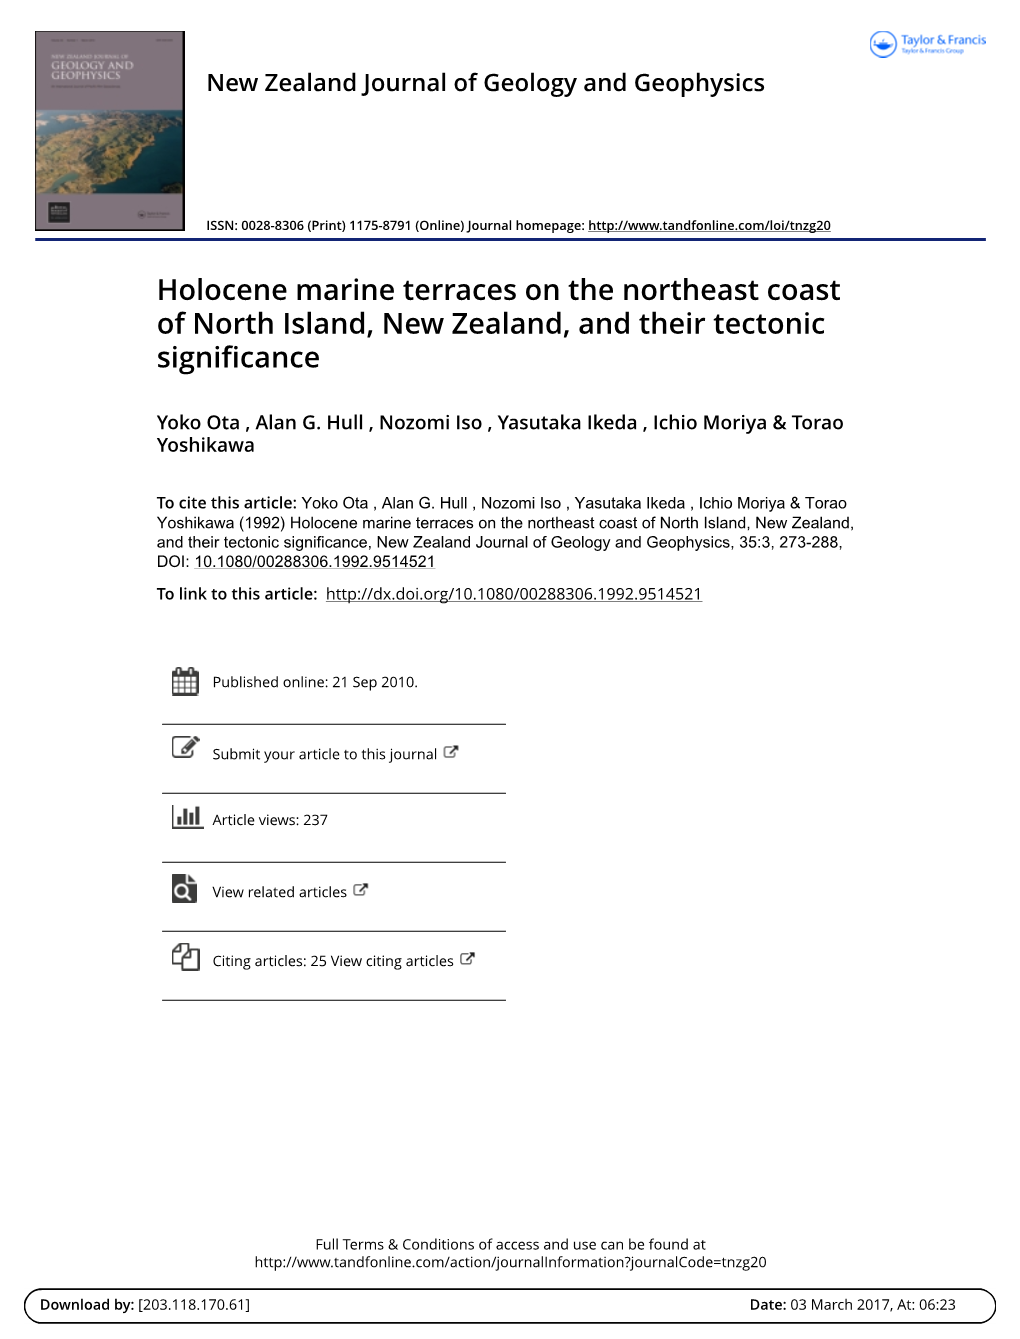 Holocene Marine Terraces on the Northeast Coast of North Island, New Zealand, and Their Tectonic Significance